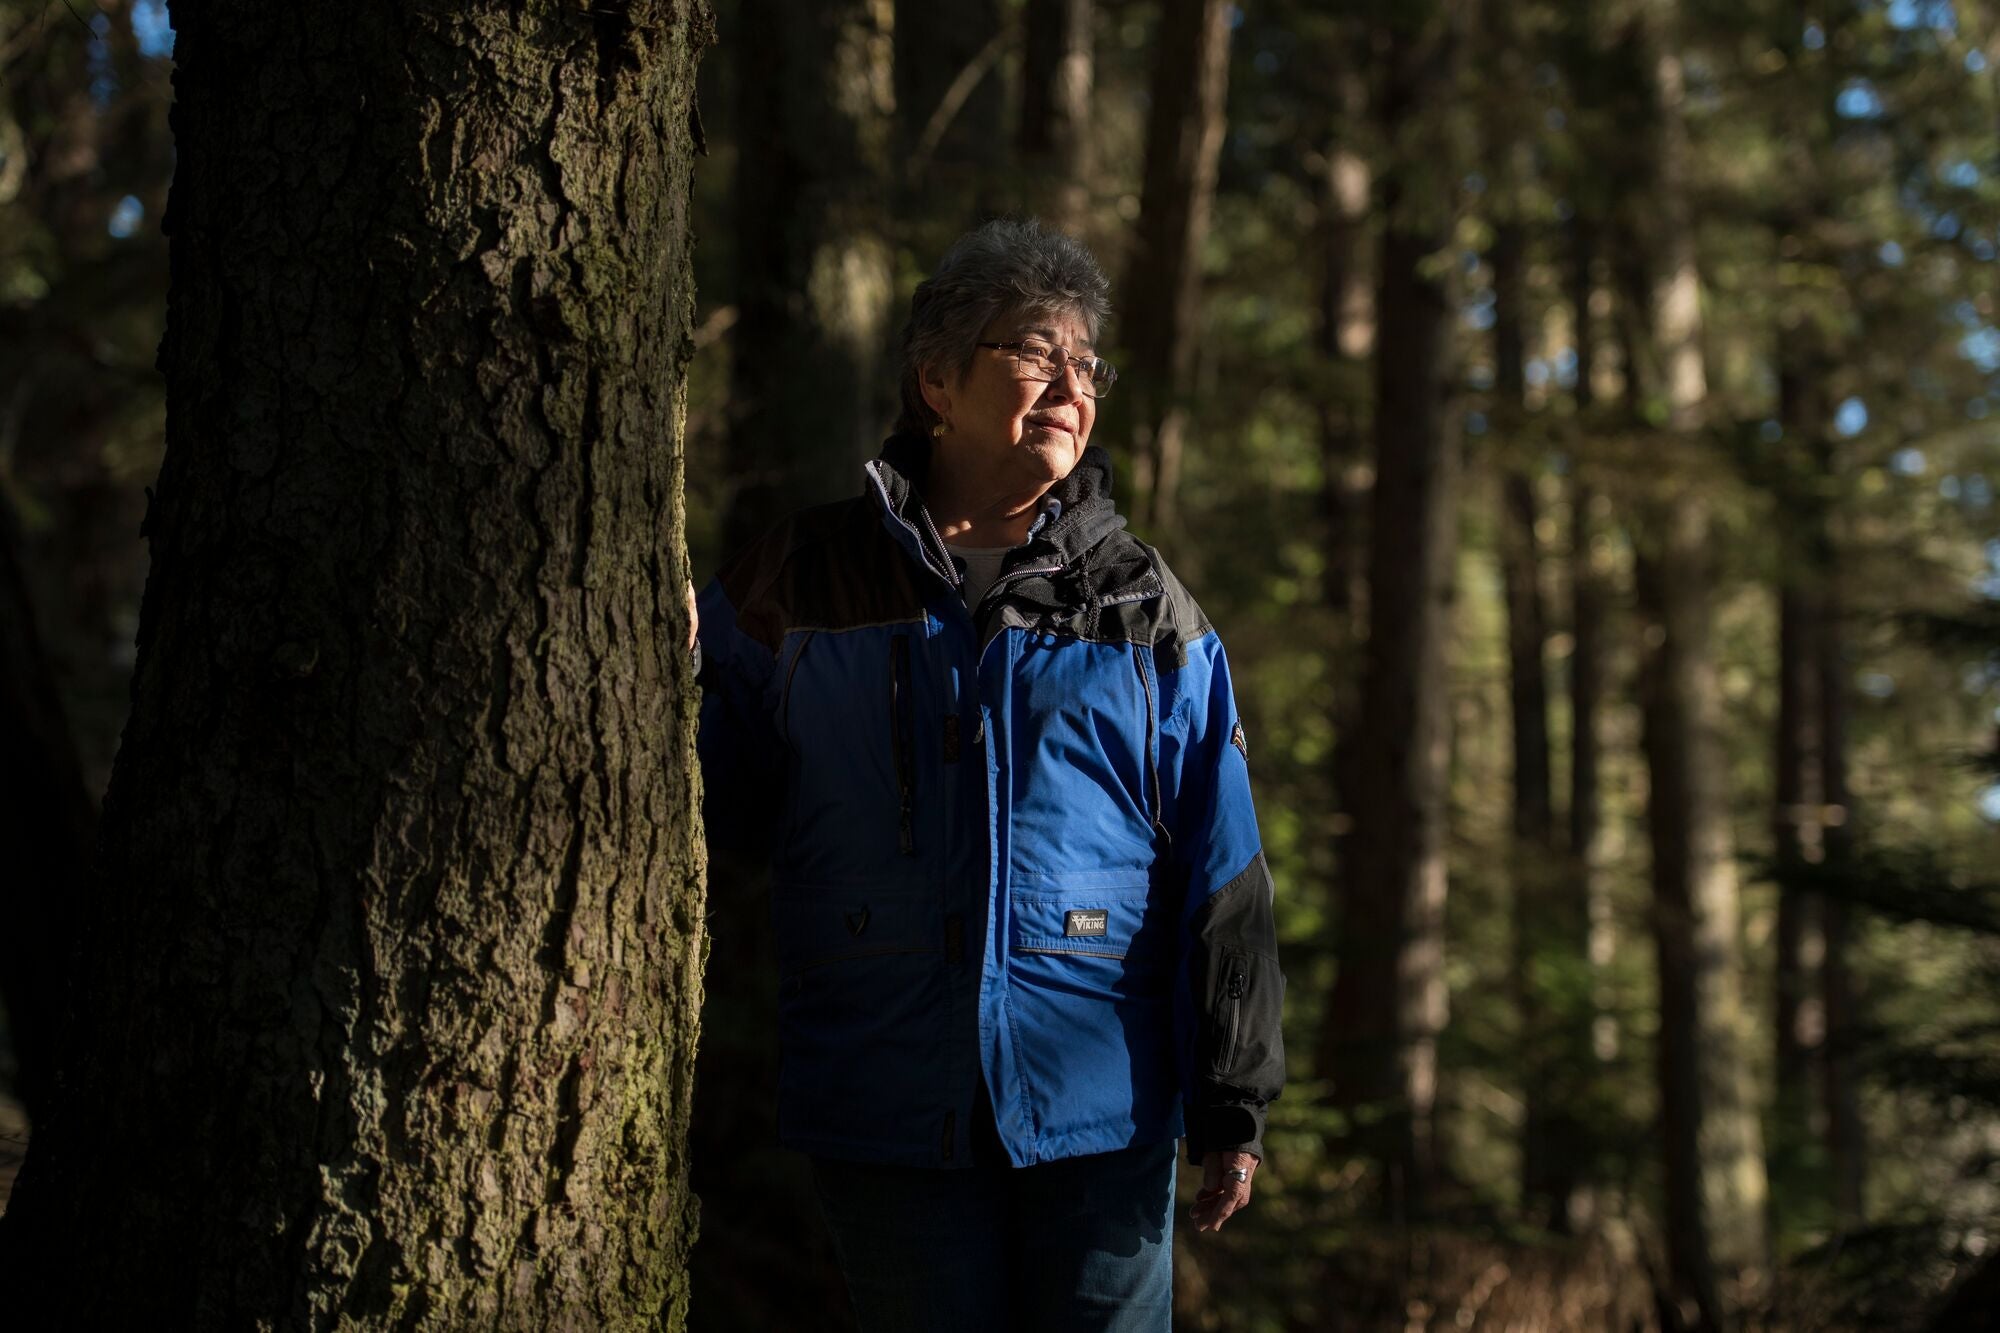 Wanda Culp and her colleagues at WECAN are fighting to defend the Tongass from logging.